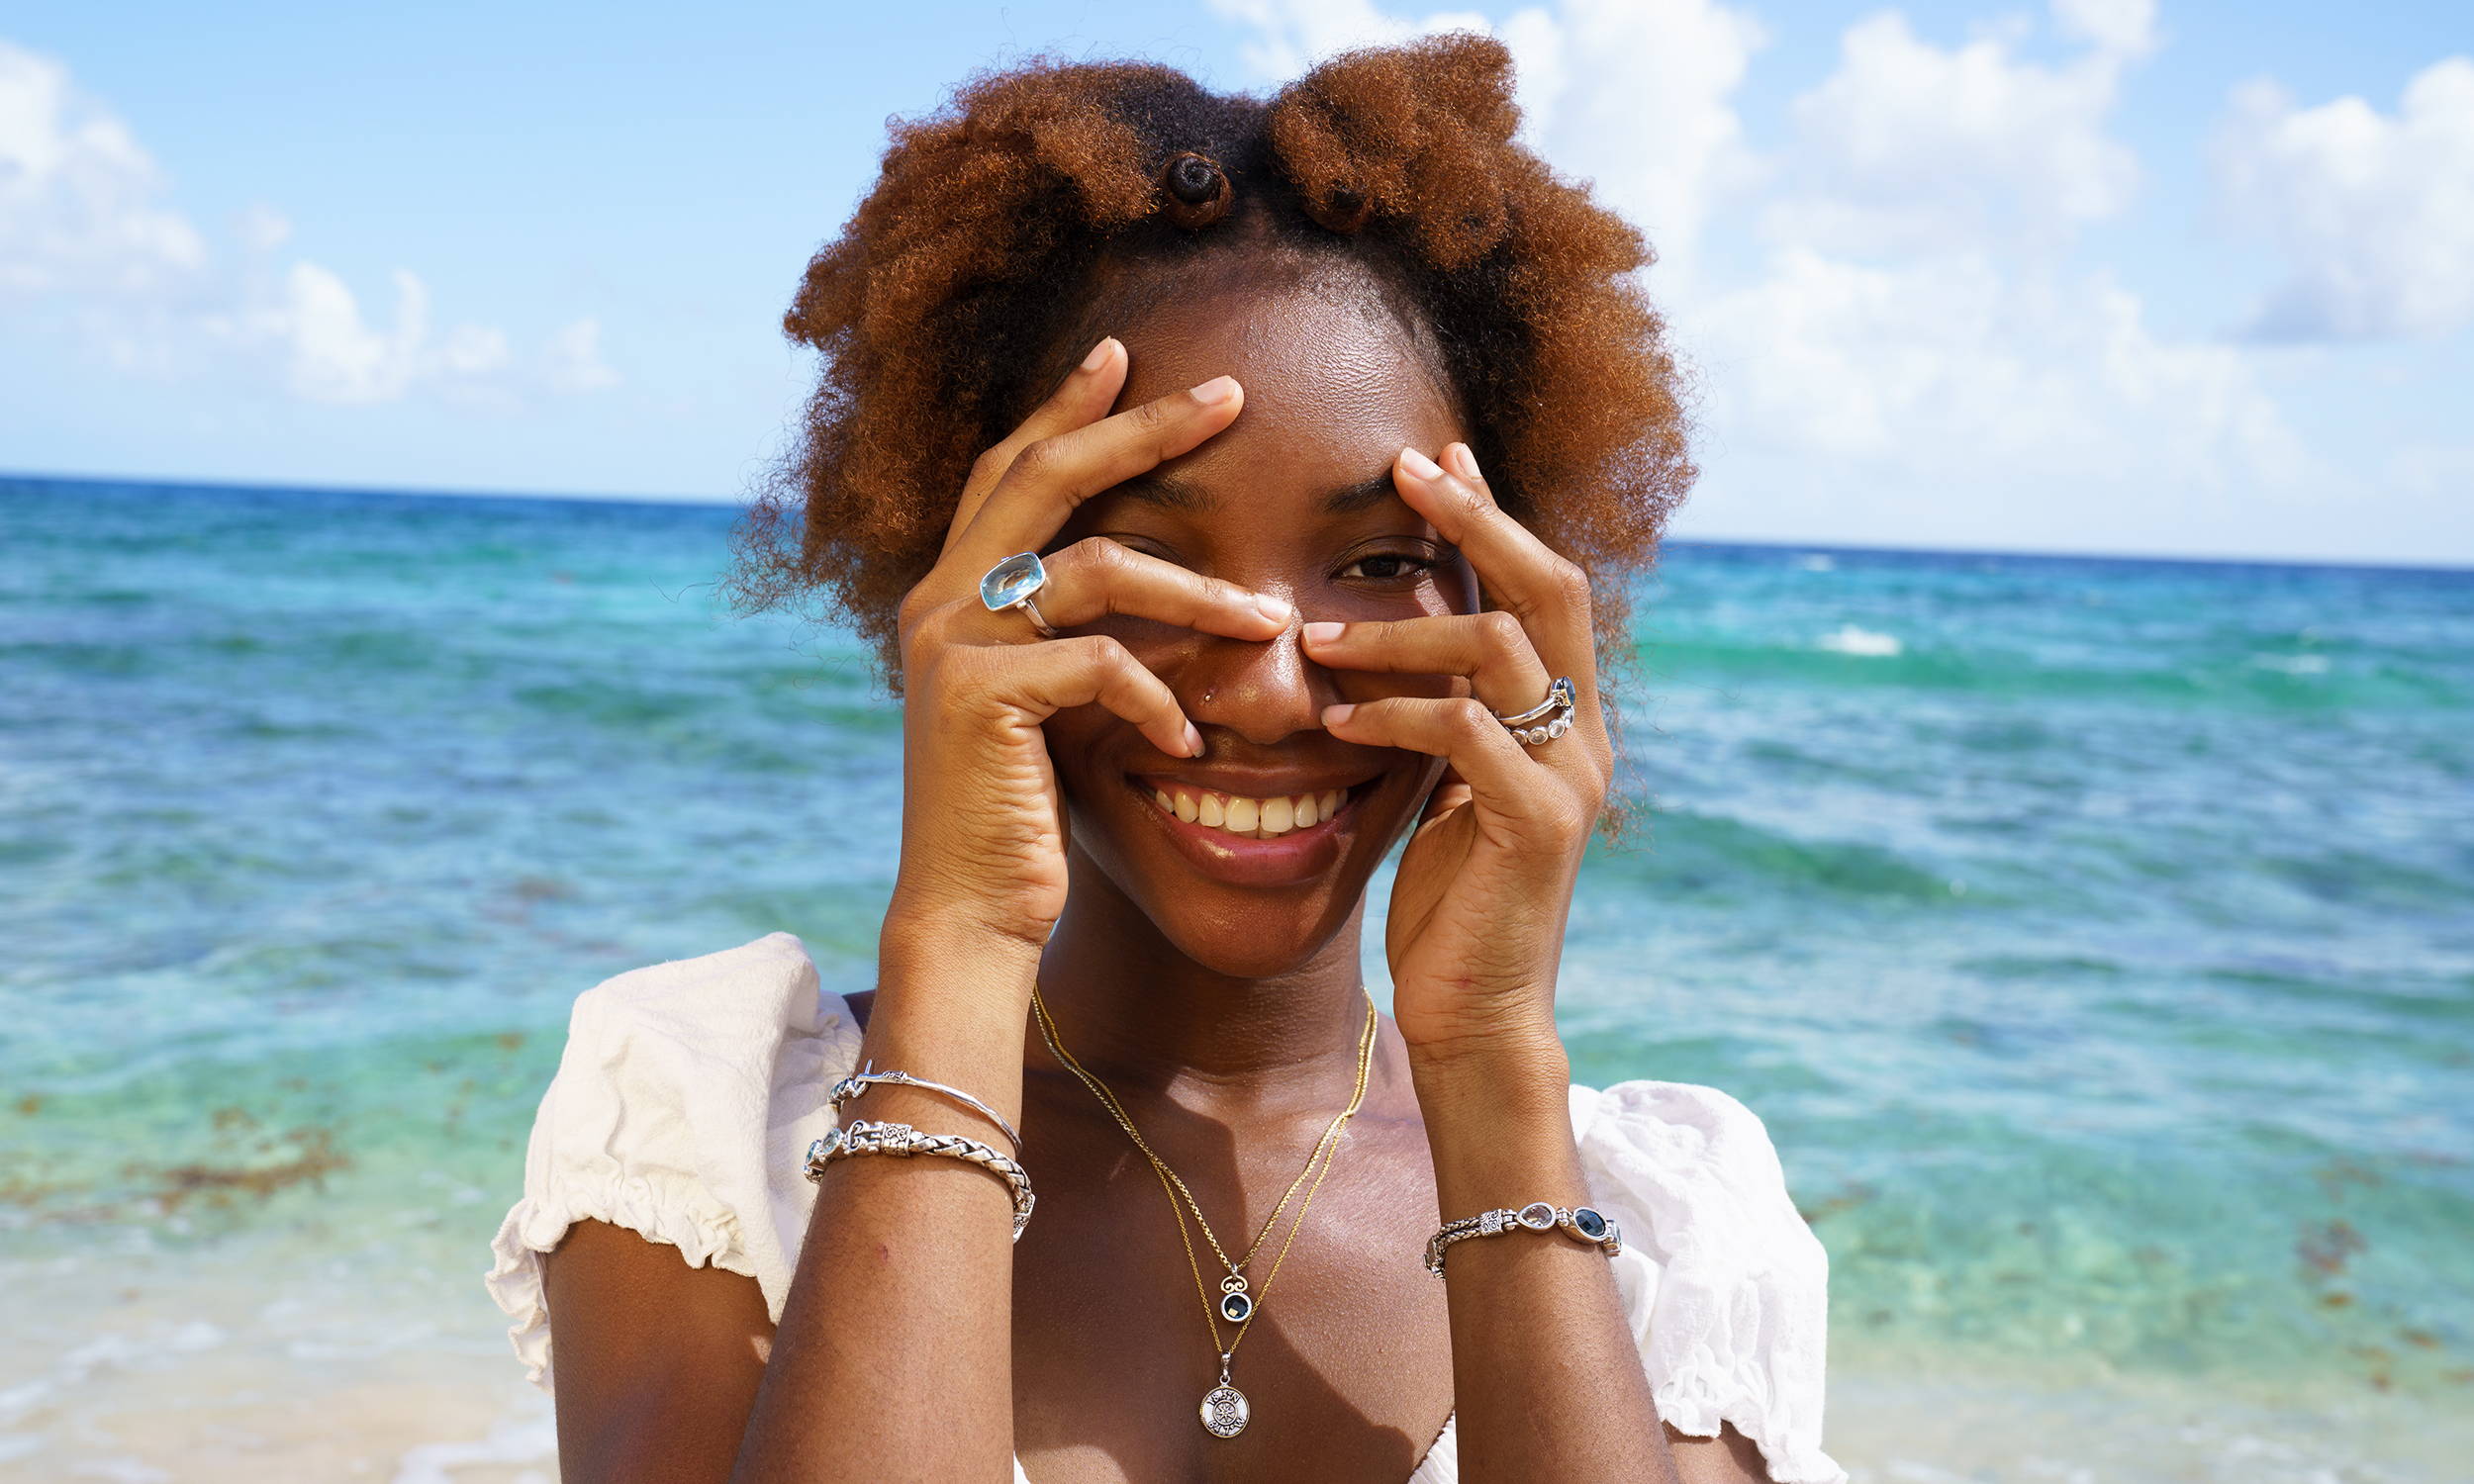 A young woman standing in front of the ocean showing off her jewelry style